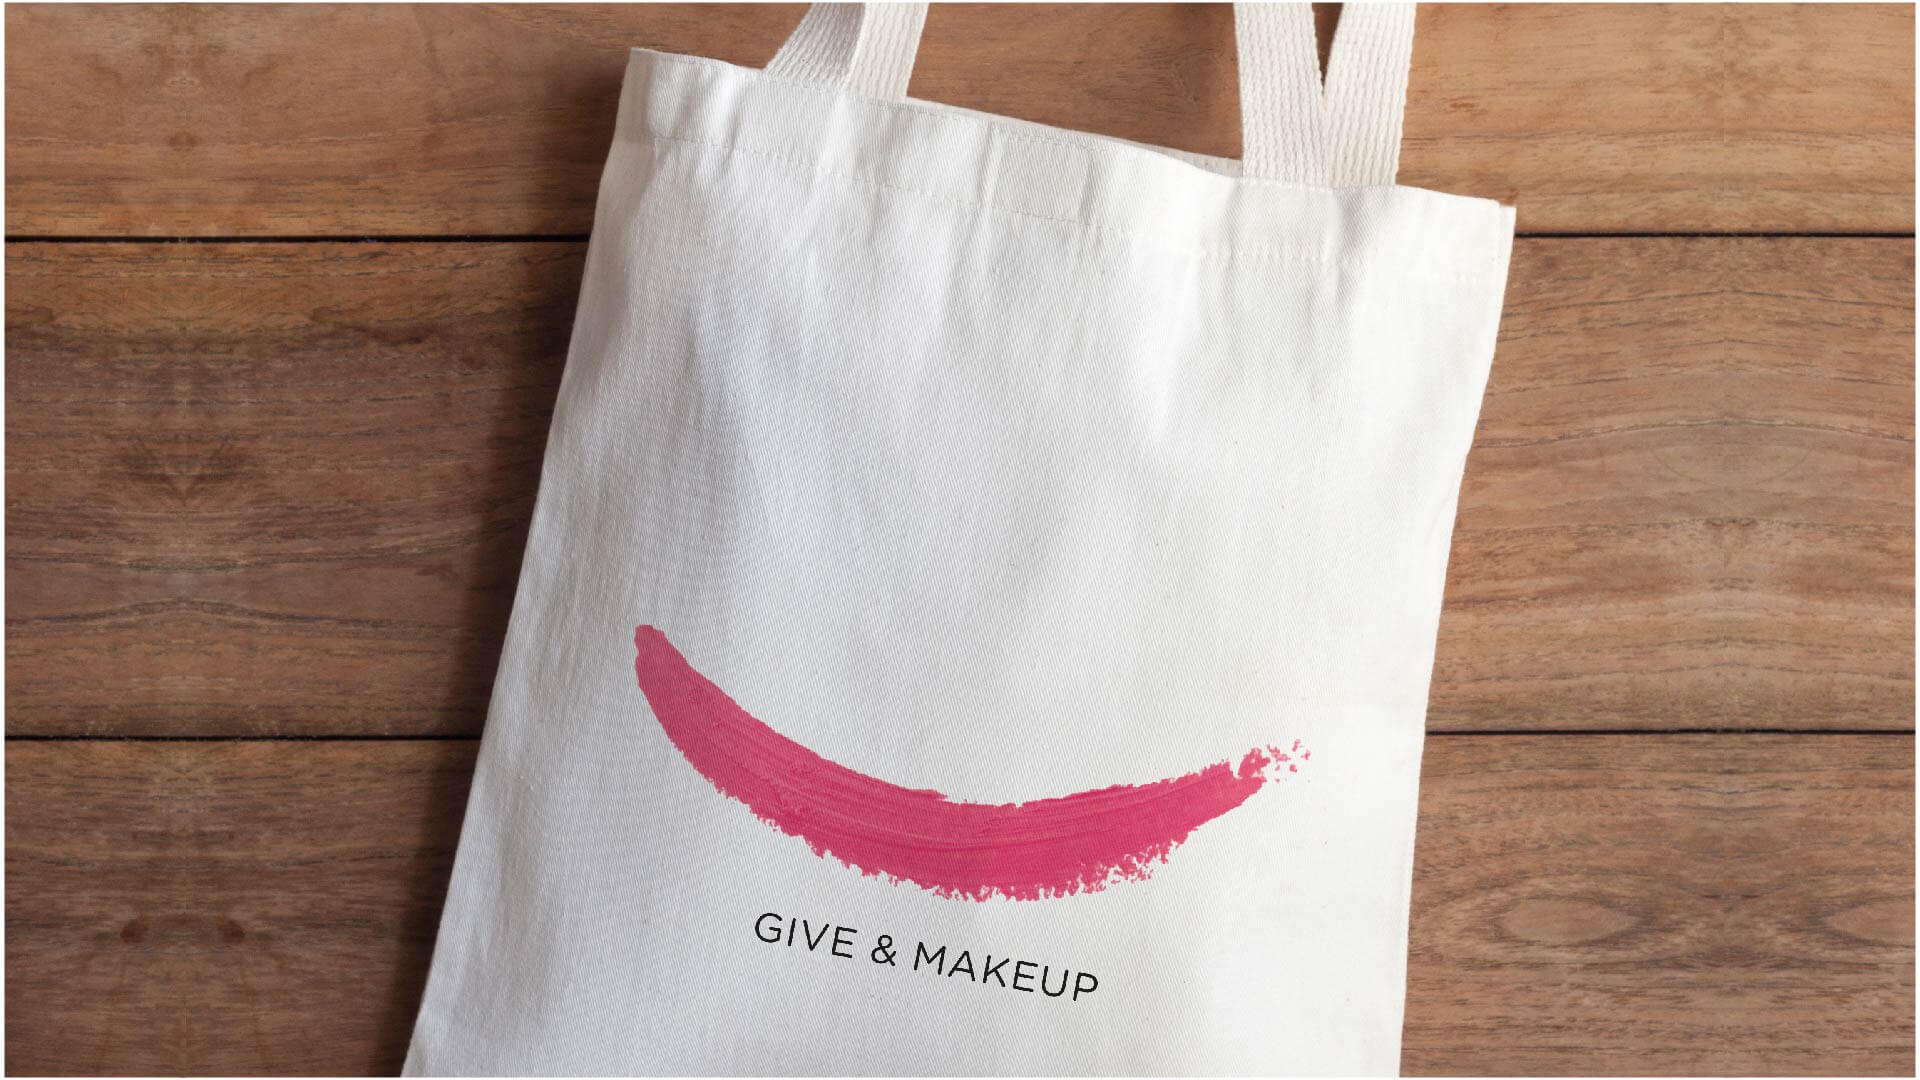 Give & Makeup Brand Identity Design